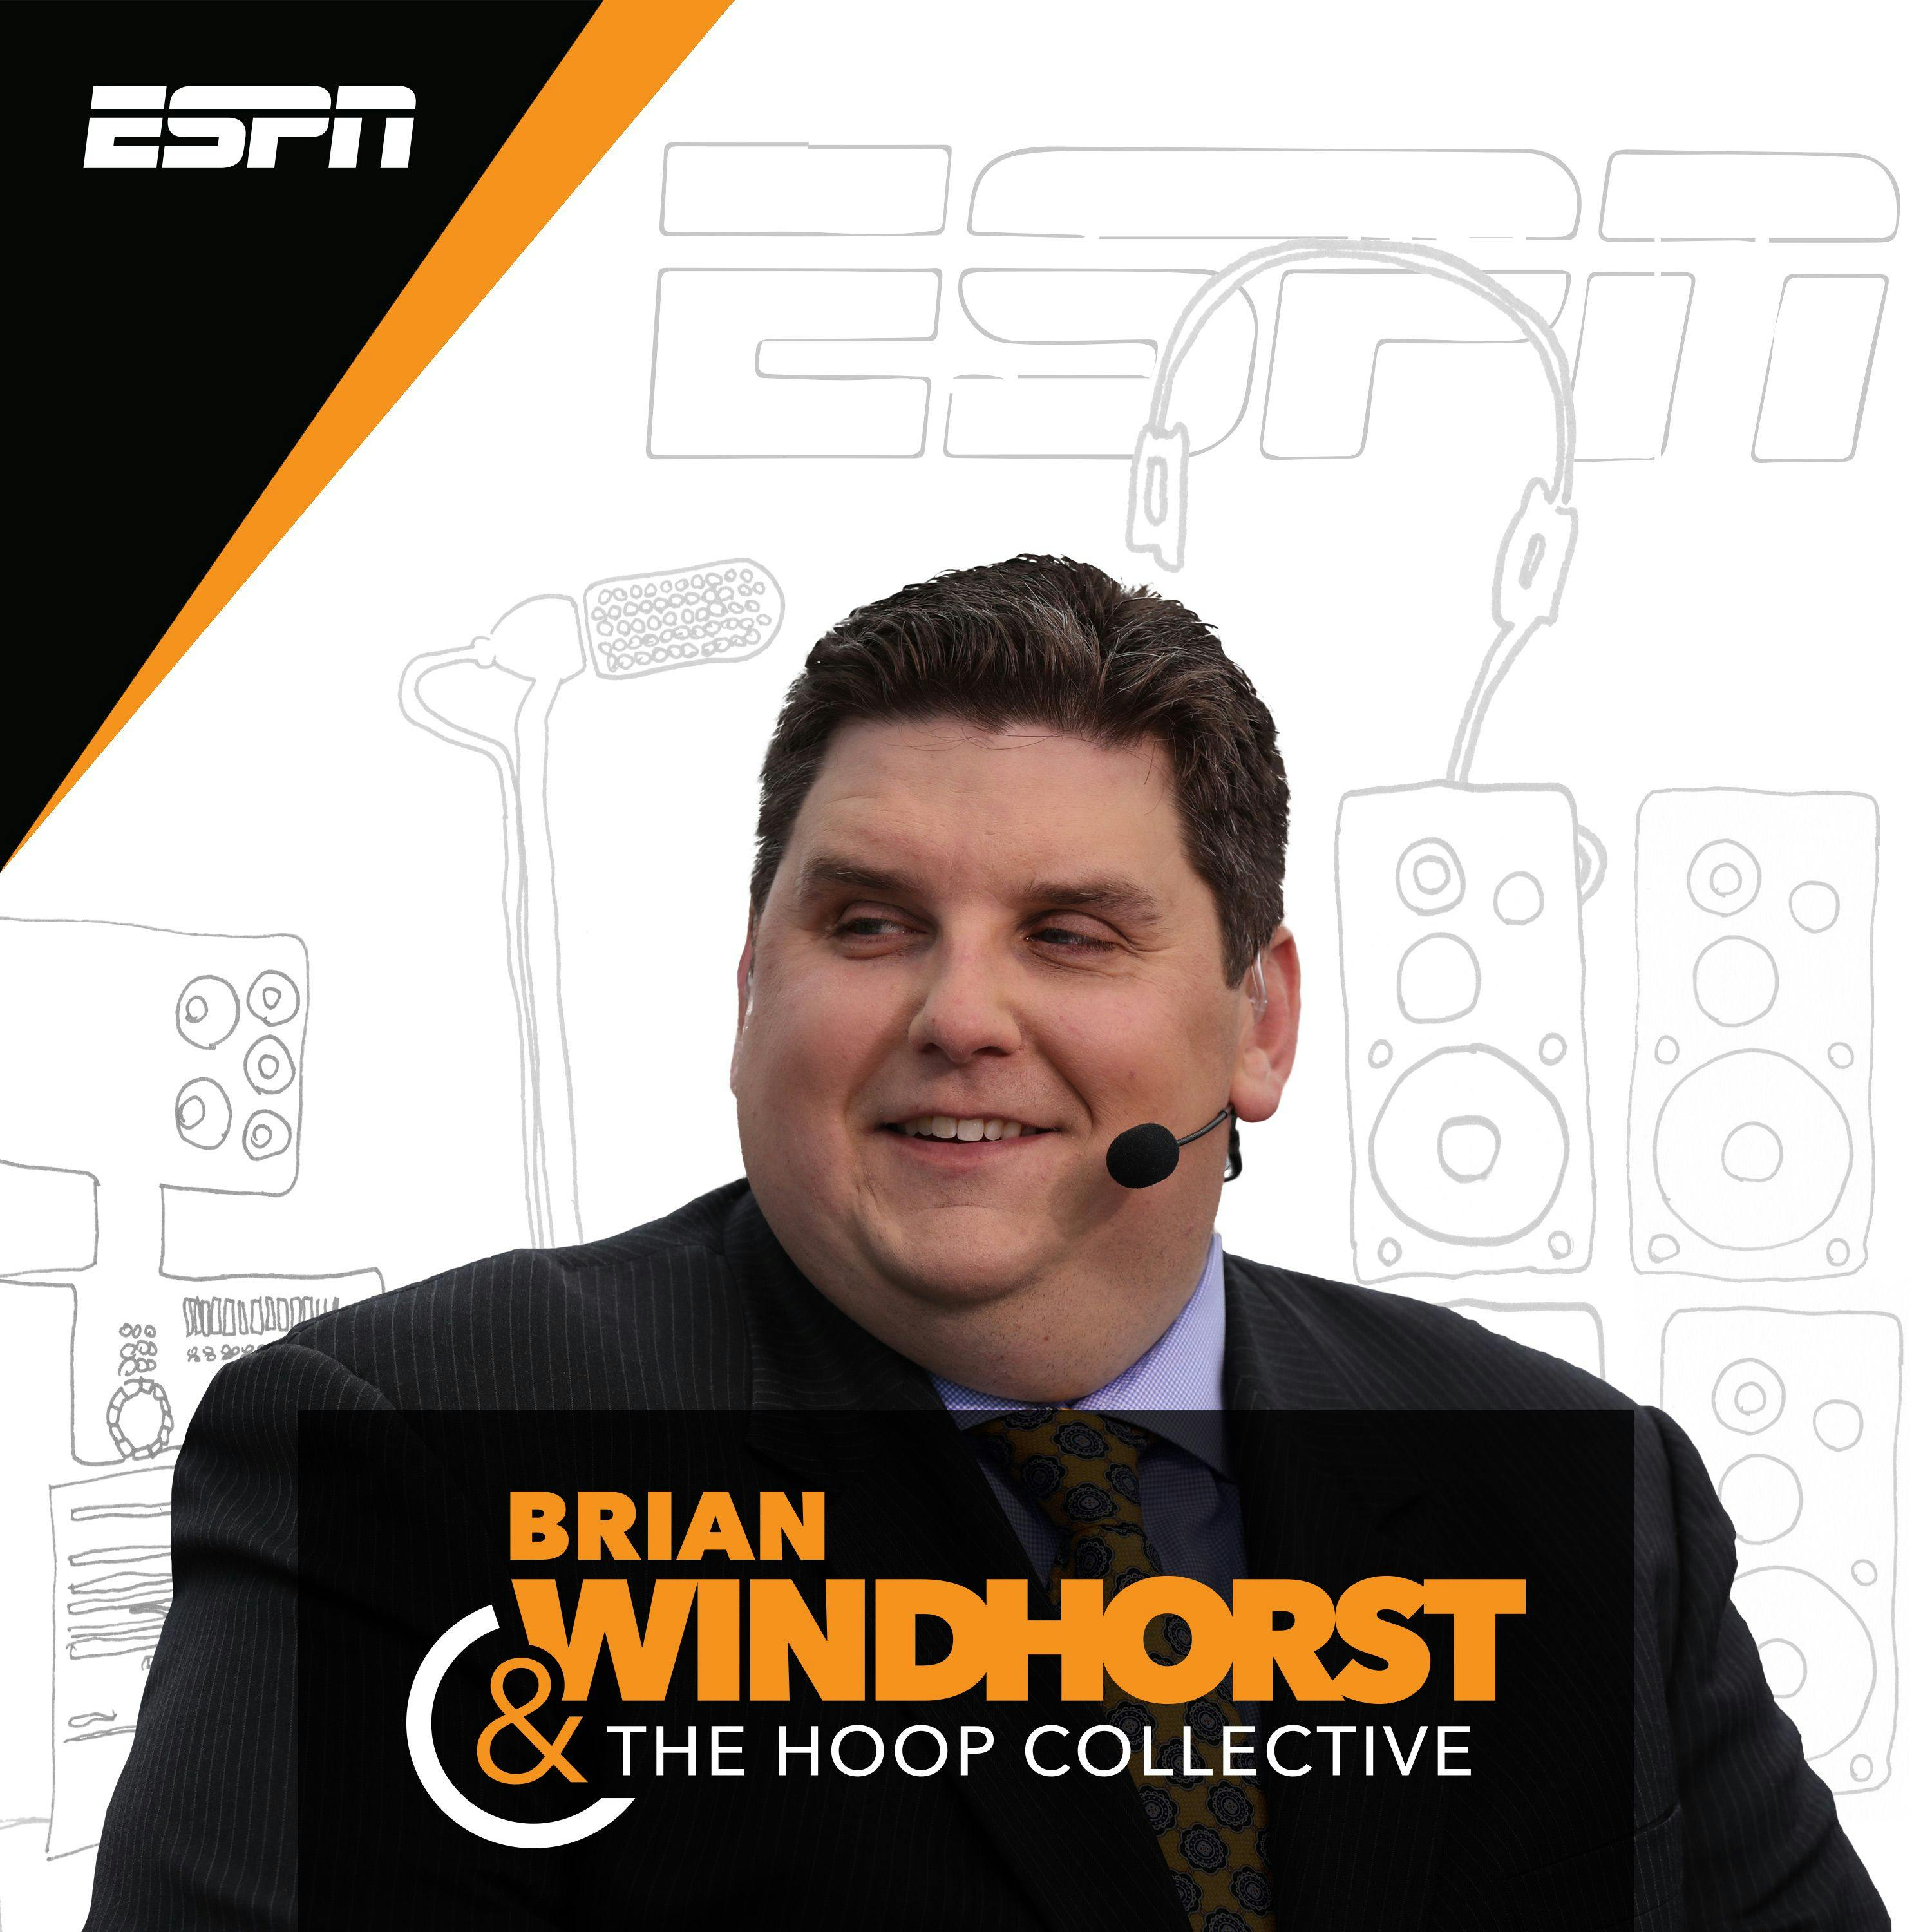 Brian Windhorst & The Hoop Collective podcast show image